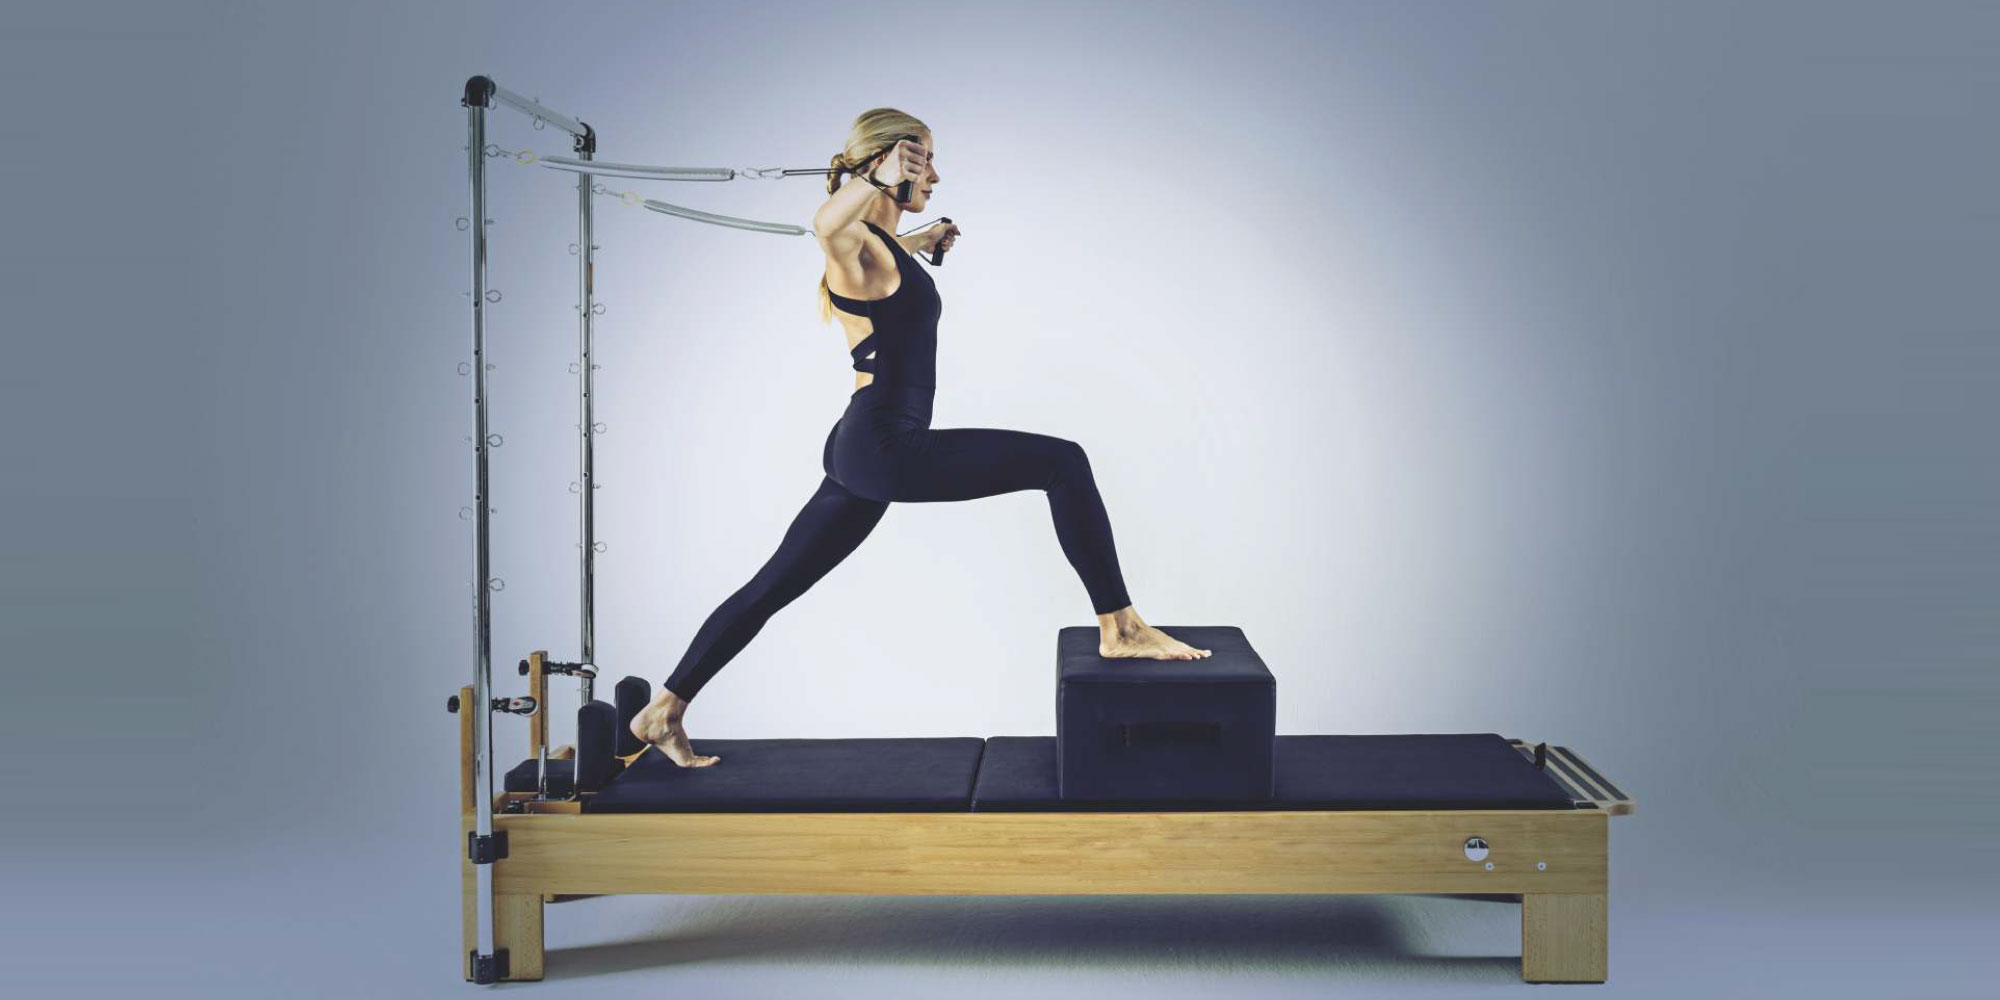 Reformers con Torre, Pilates Equipment Fitness